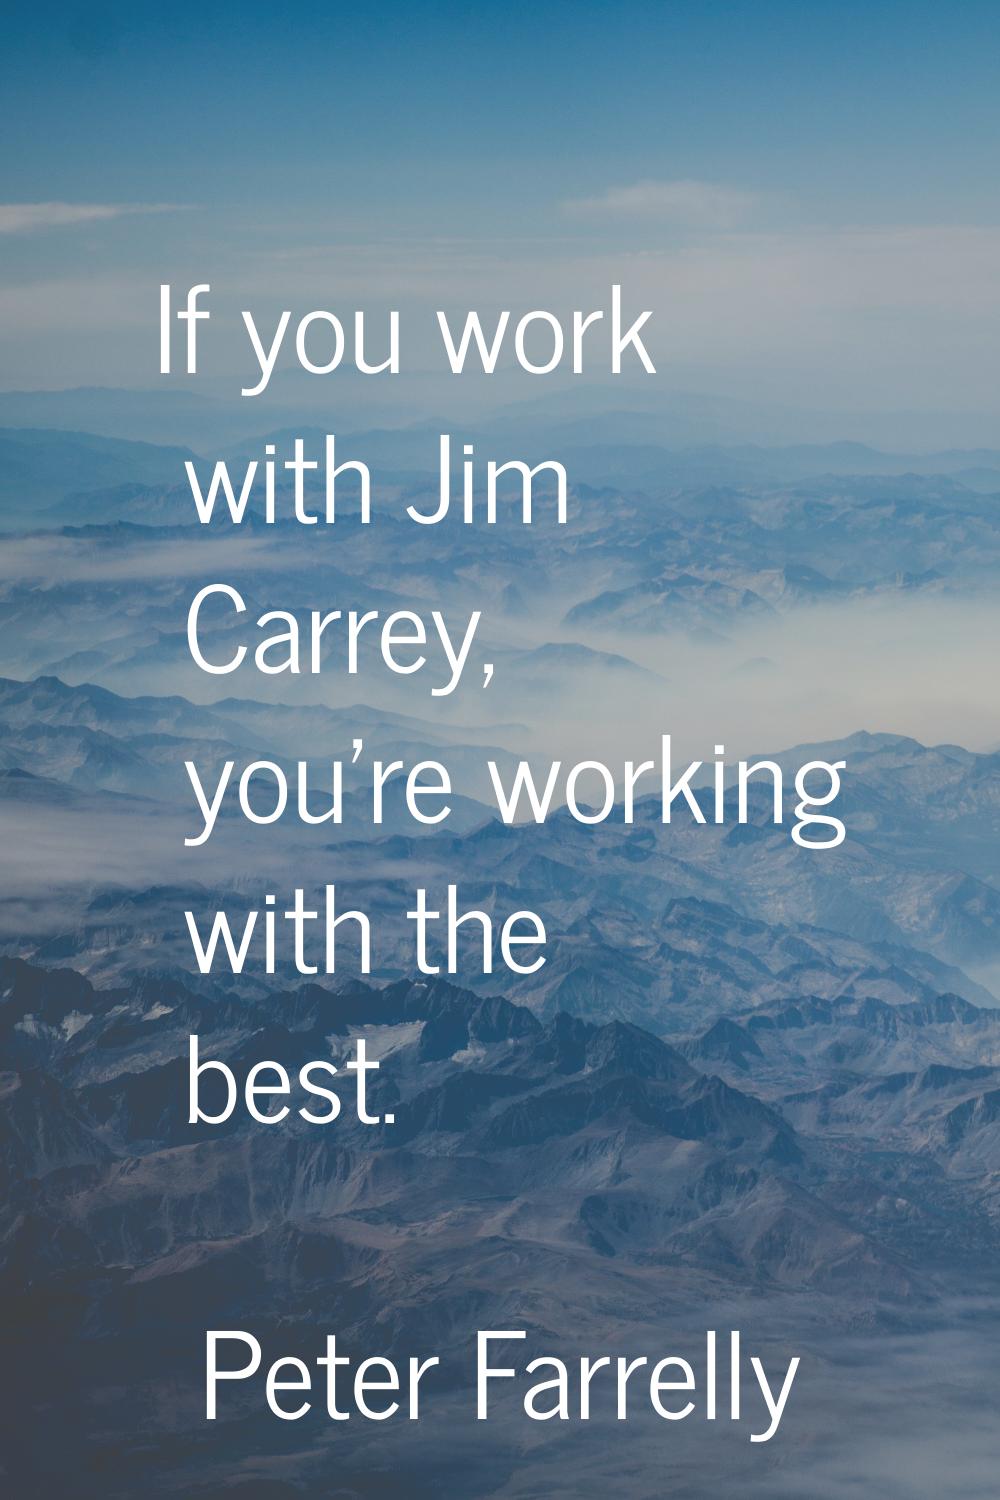 If you work with Jim Carrey, you're working with the best.